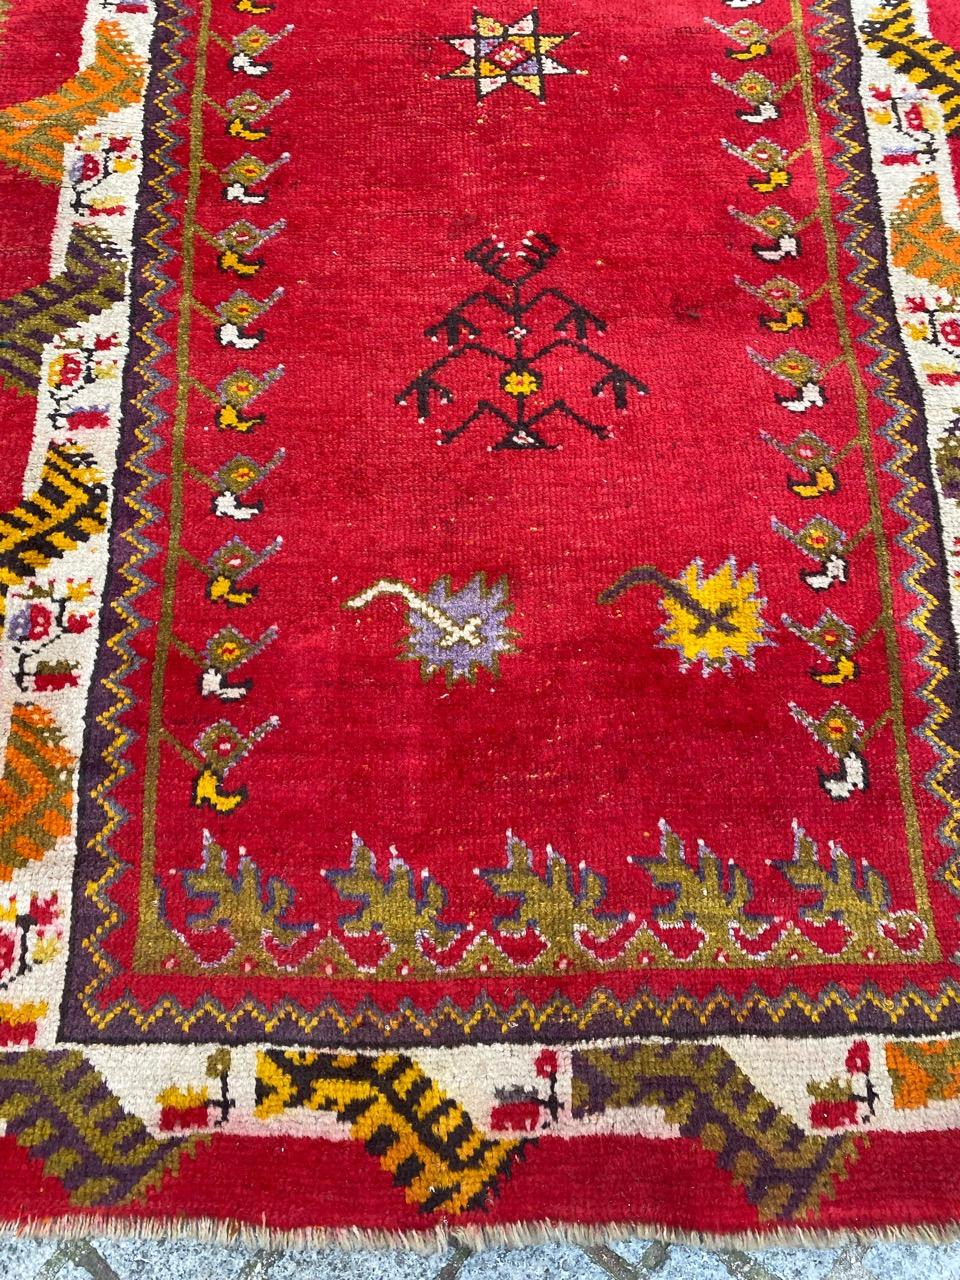 Pretty antique Turkish oushak runner with beautiful simple design and nice natural colors with a red field, entirely hand knotted with wool velvet on wool foundation.

✨✨✨
